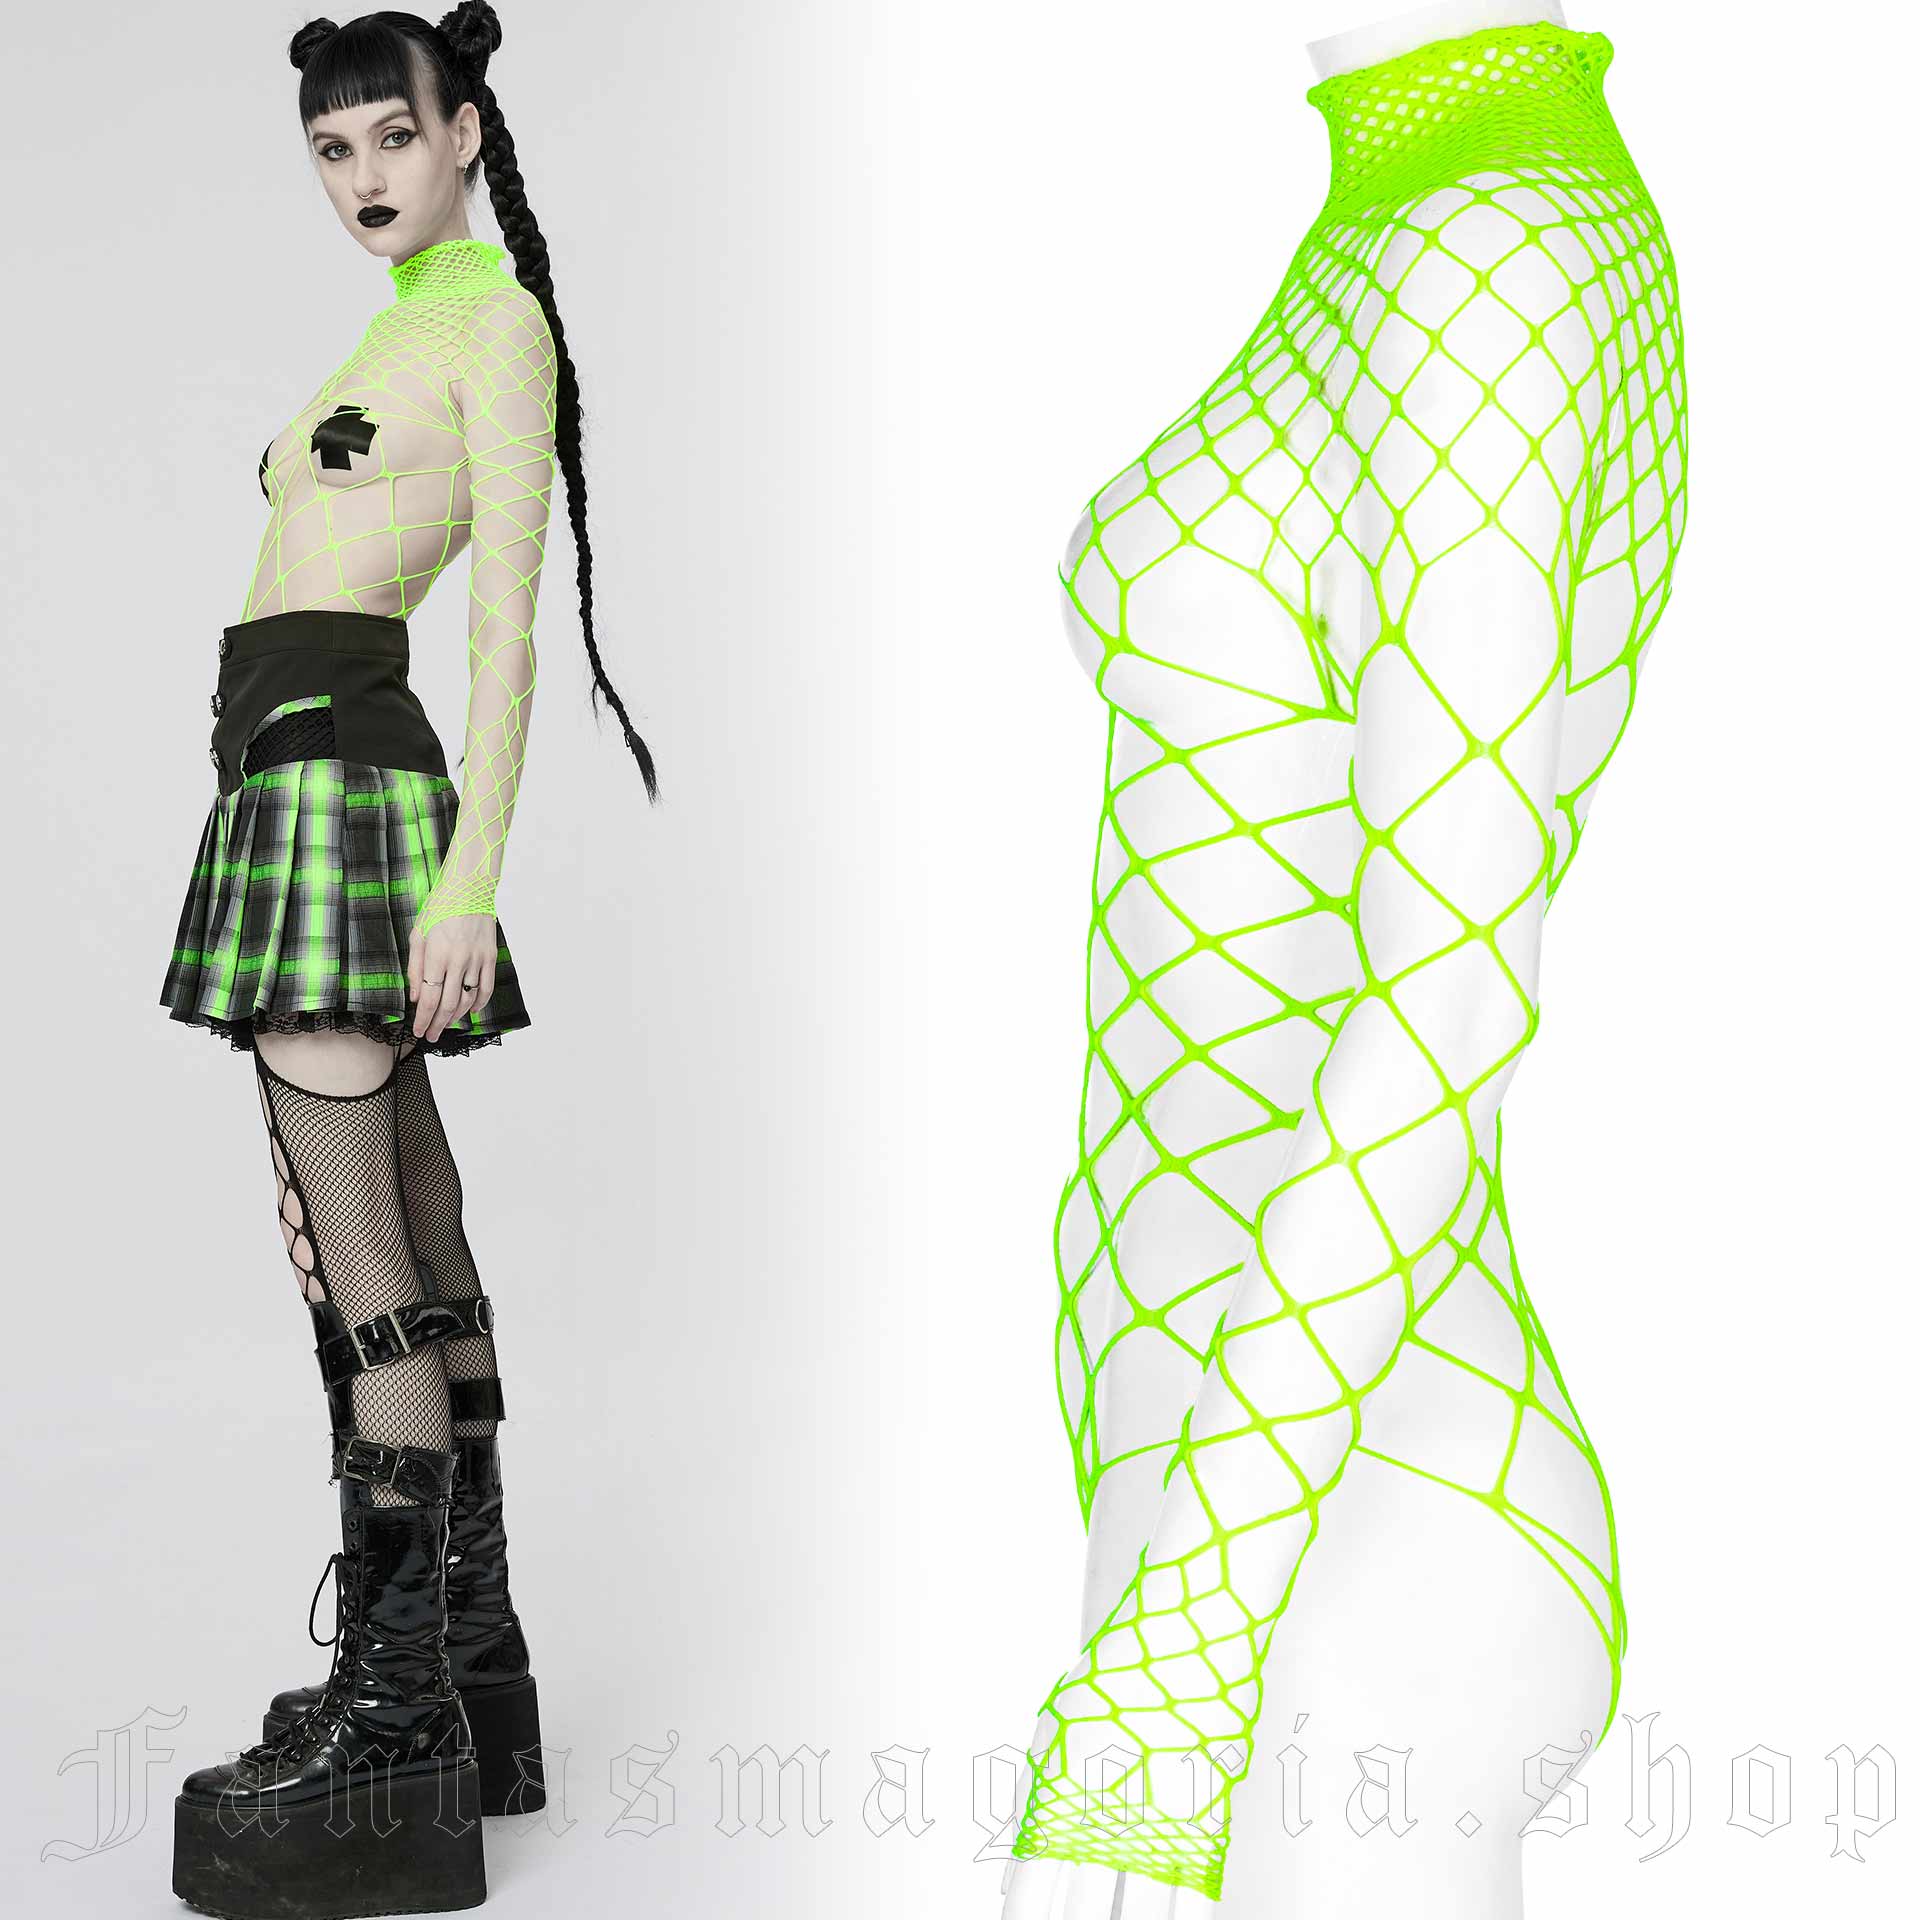 Neon Green Fishnets Pantyhose Rave Club Wear Cosplay Anime